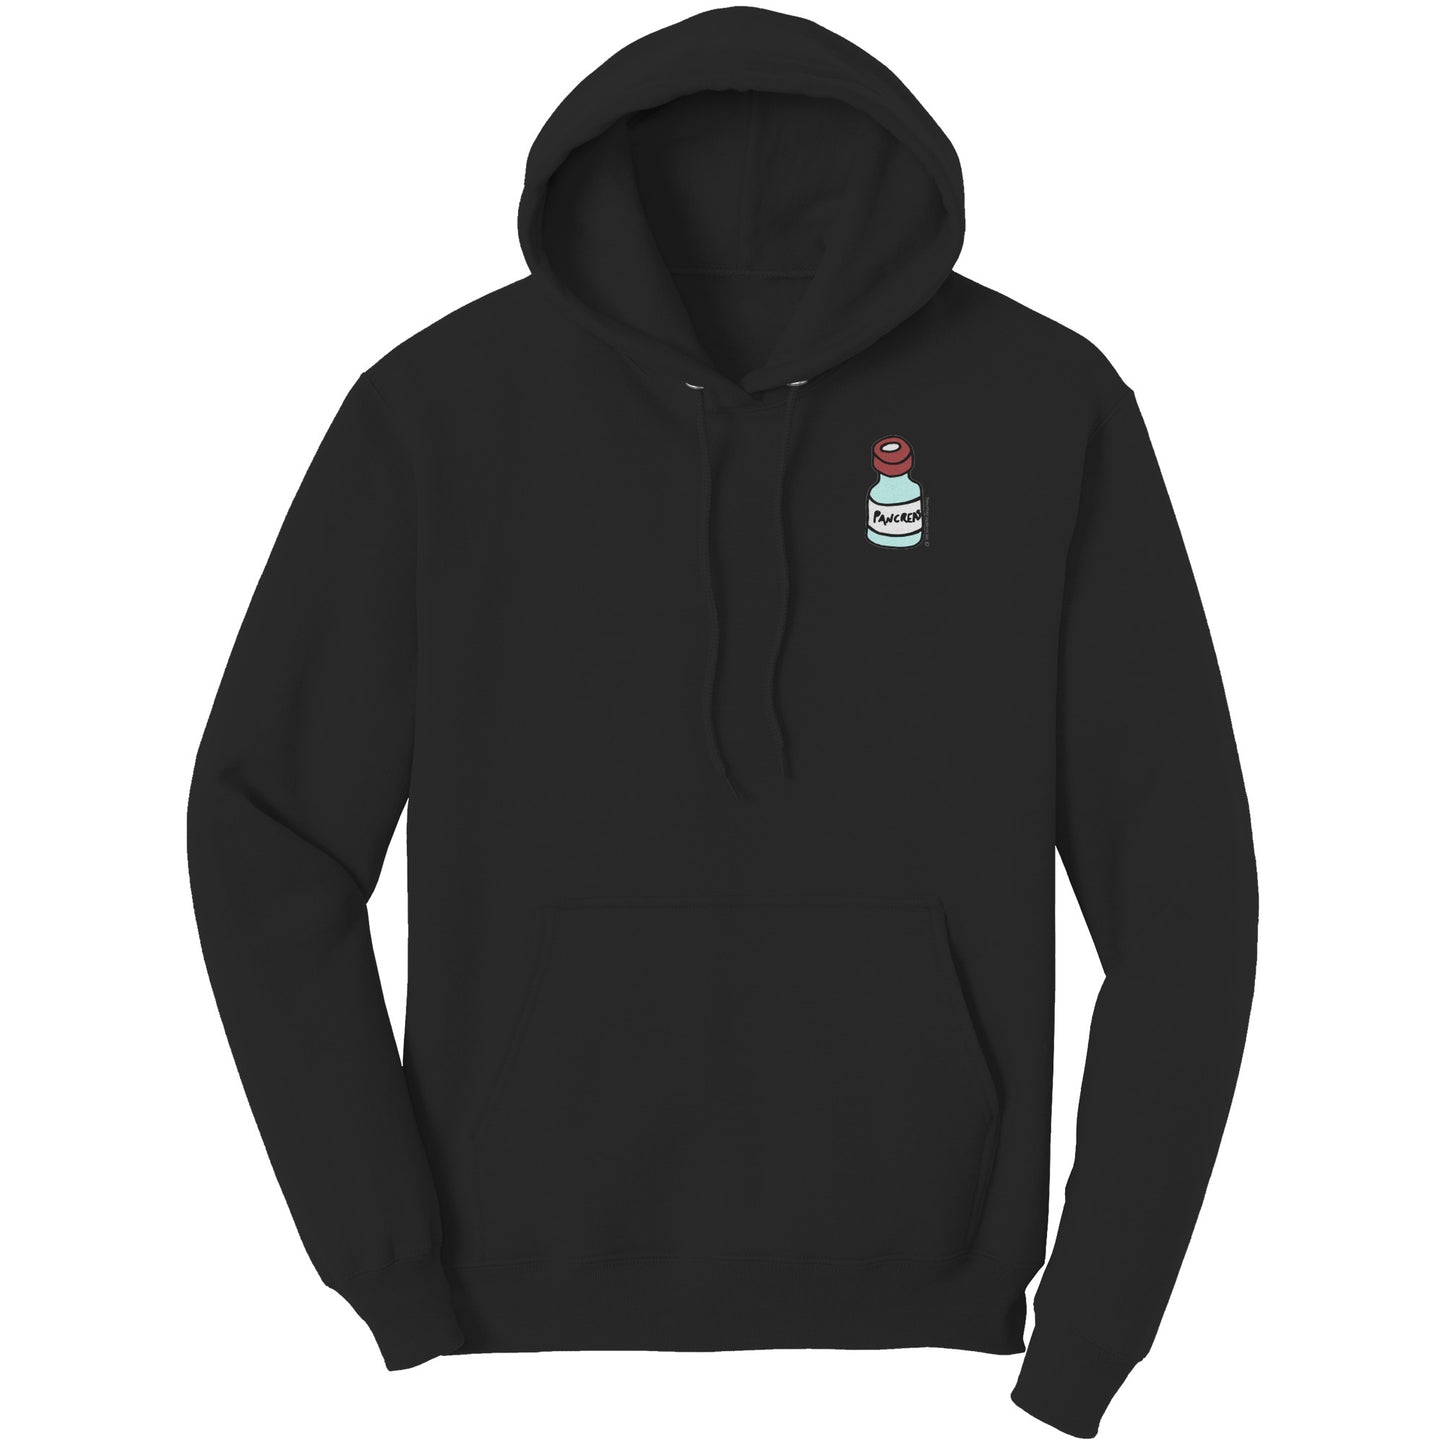 Hoodie with a cartoon of a little pancreas vial on the left hand side